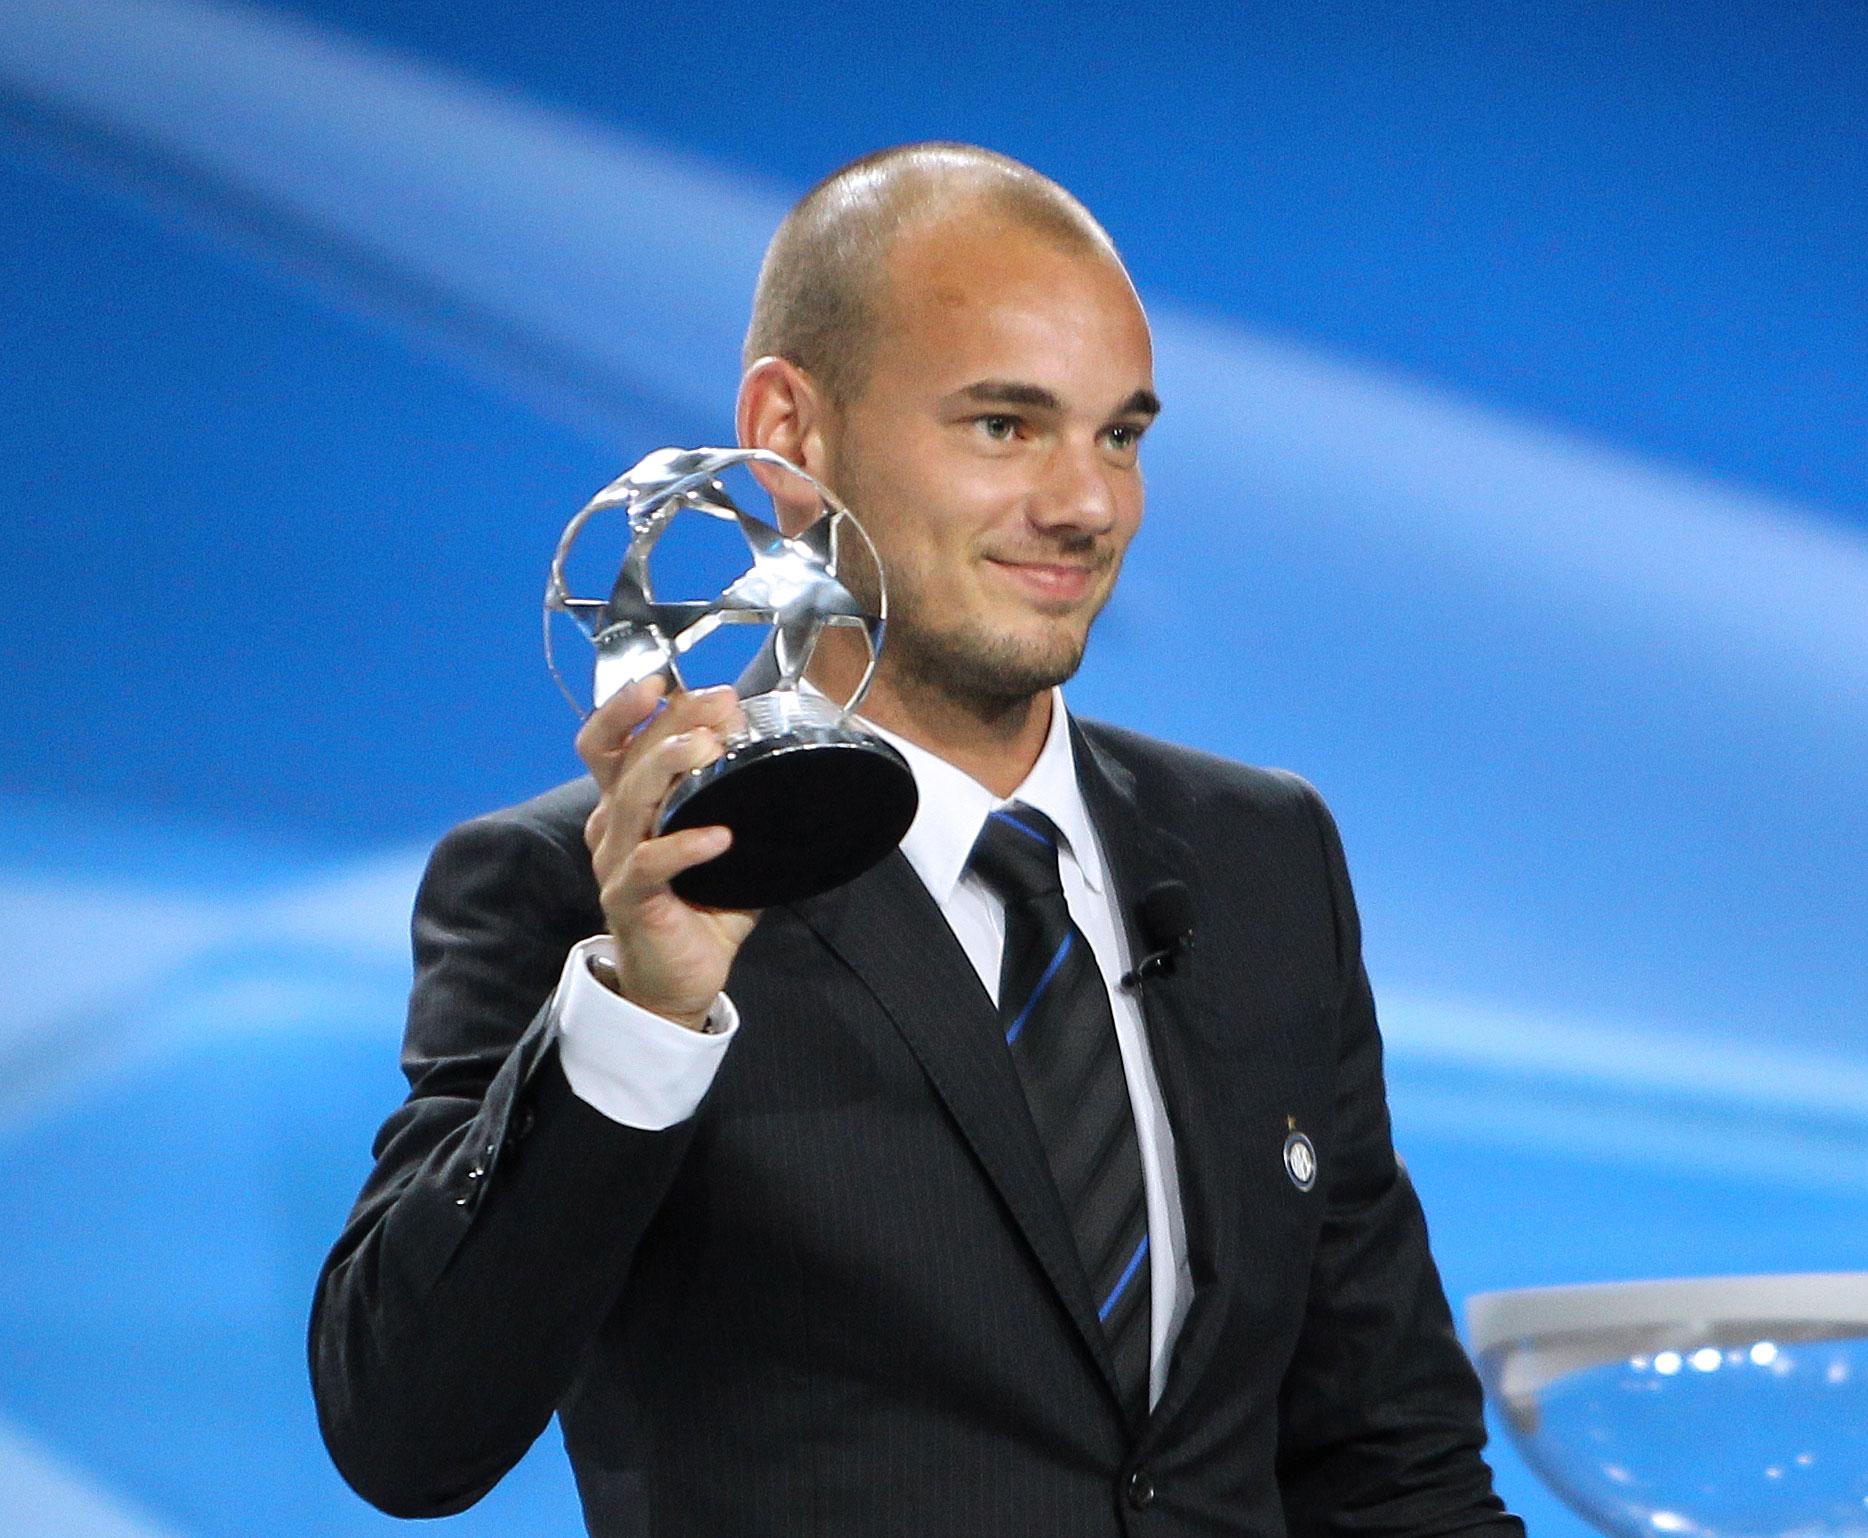 Sneijder was at the peak of his powers in 2010